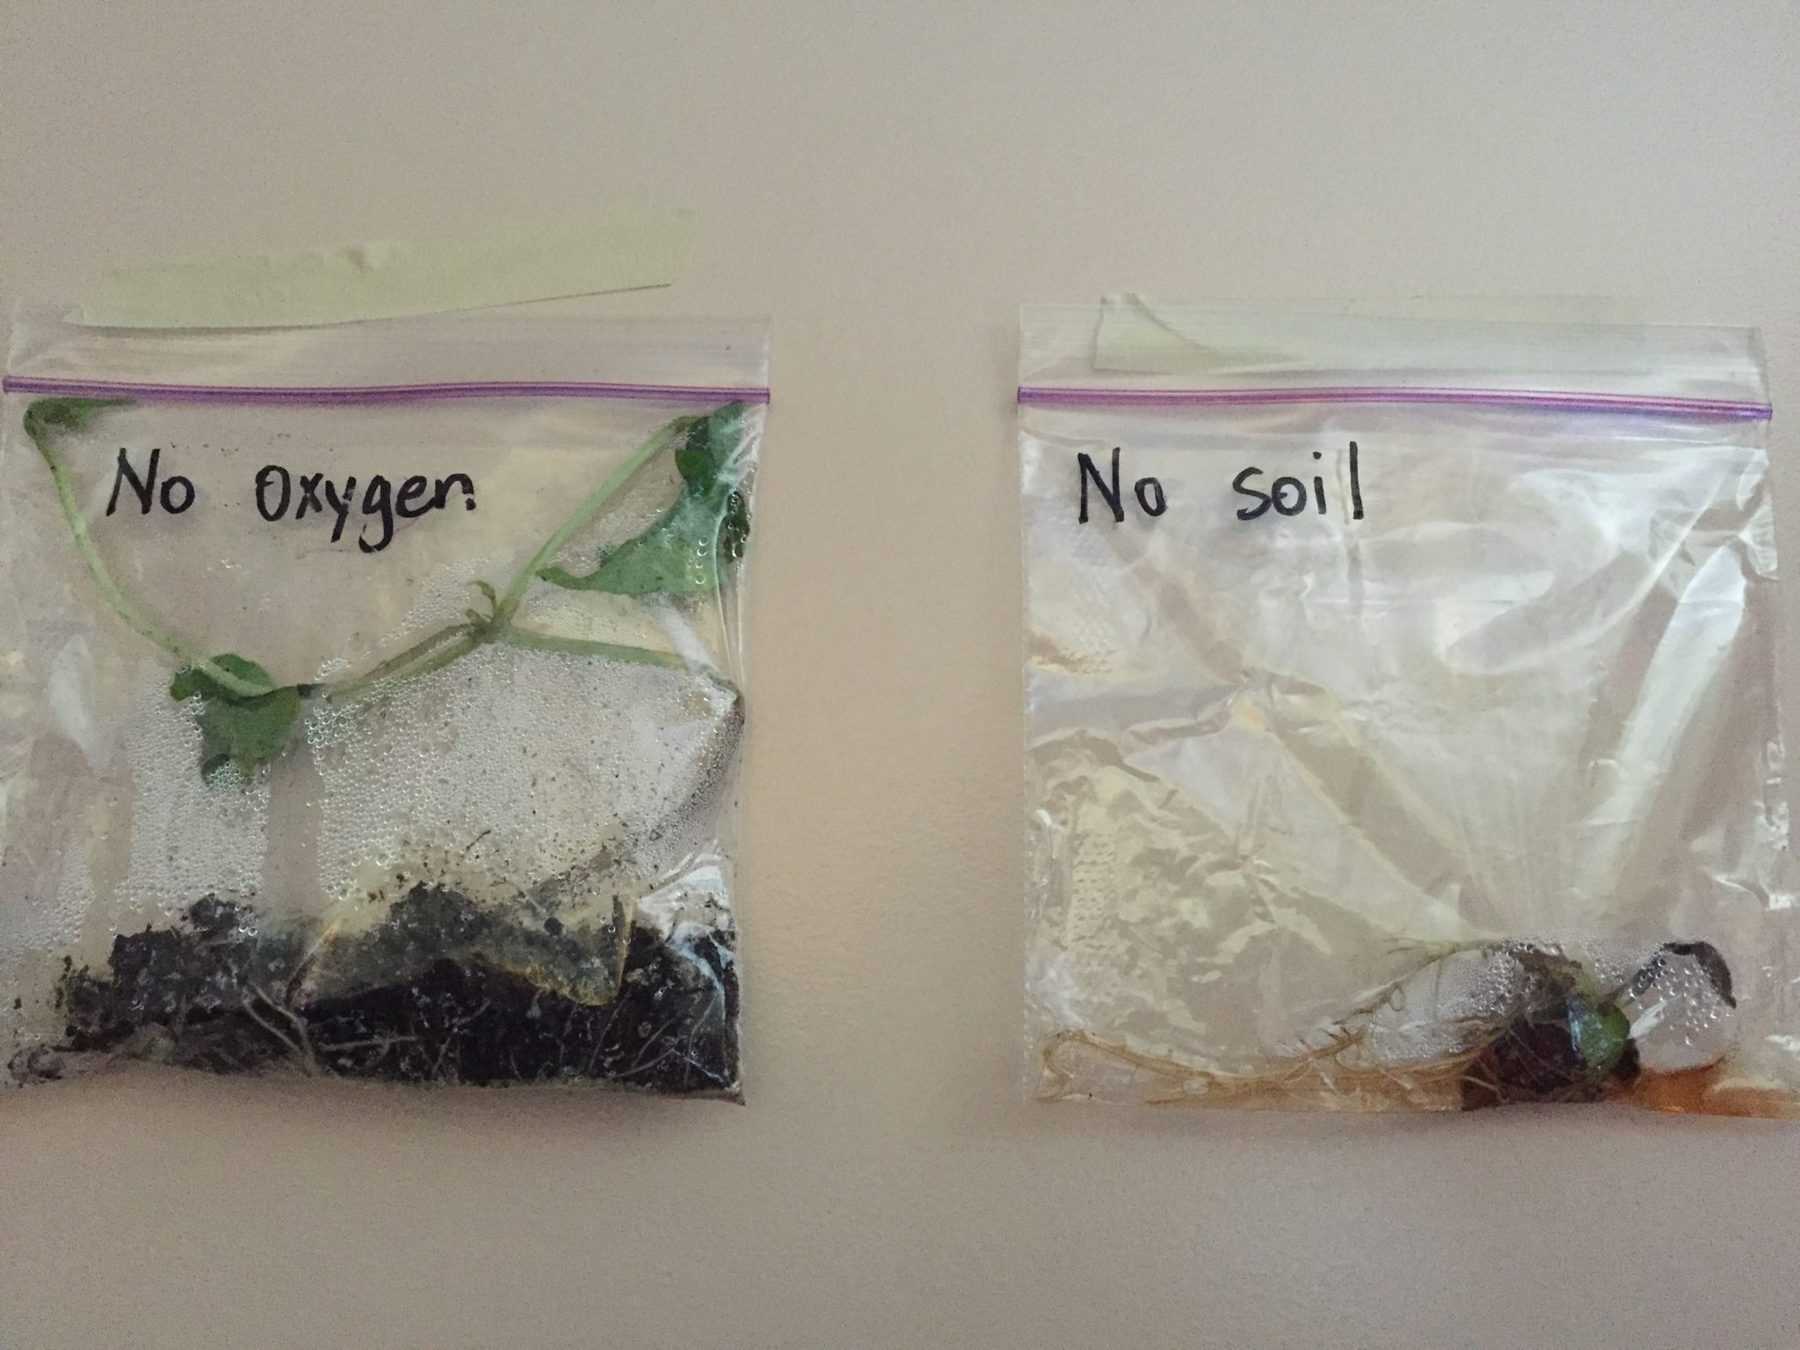 Baggies with soil and no soil